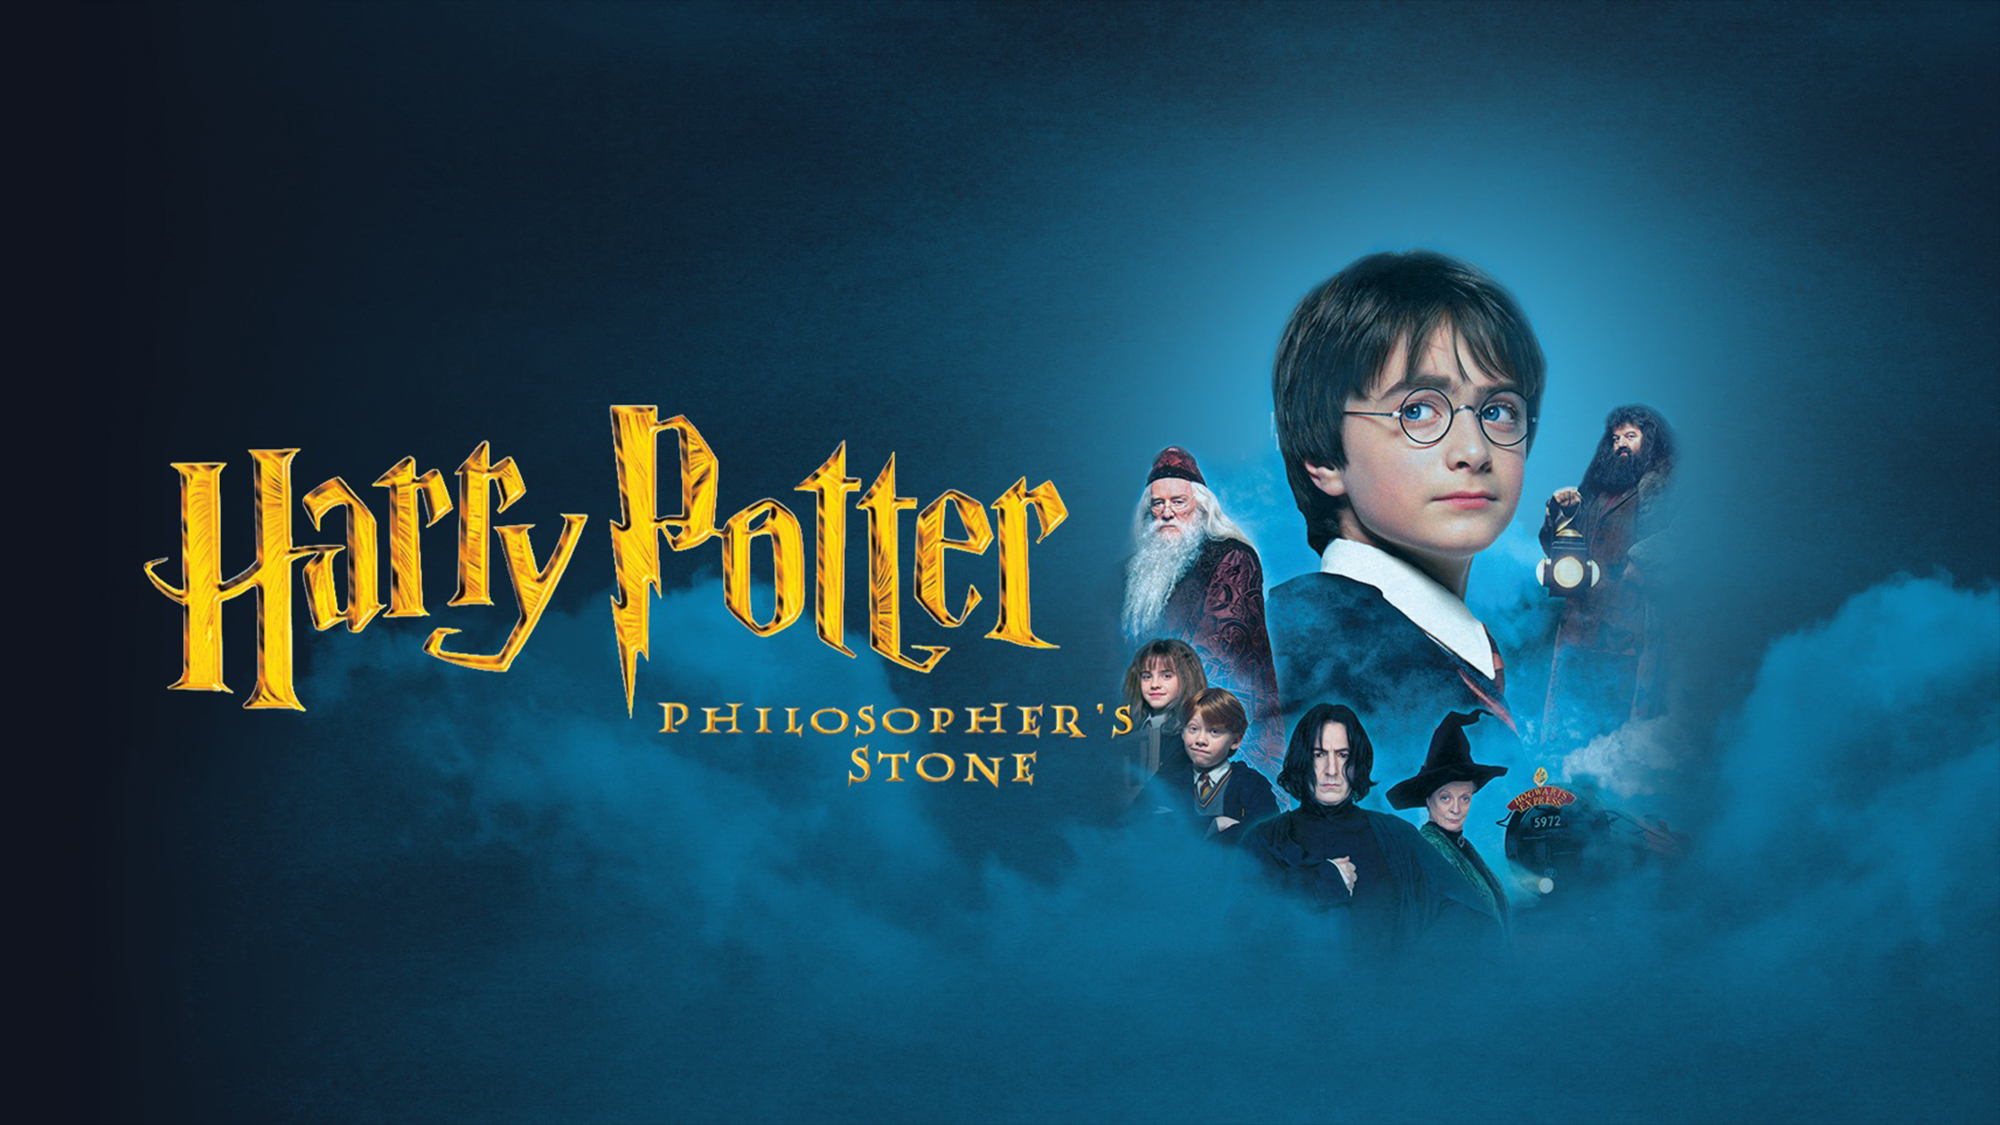 Desktop FHD movie, harry potter and the philosopher's stone, harry potter